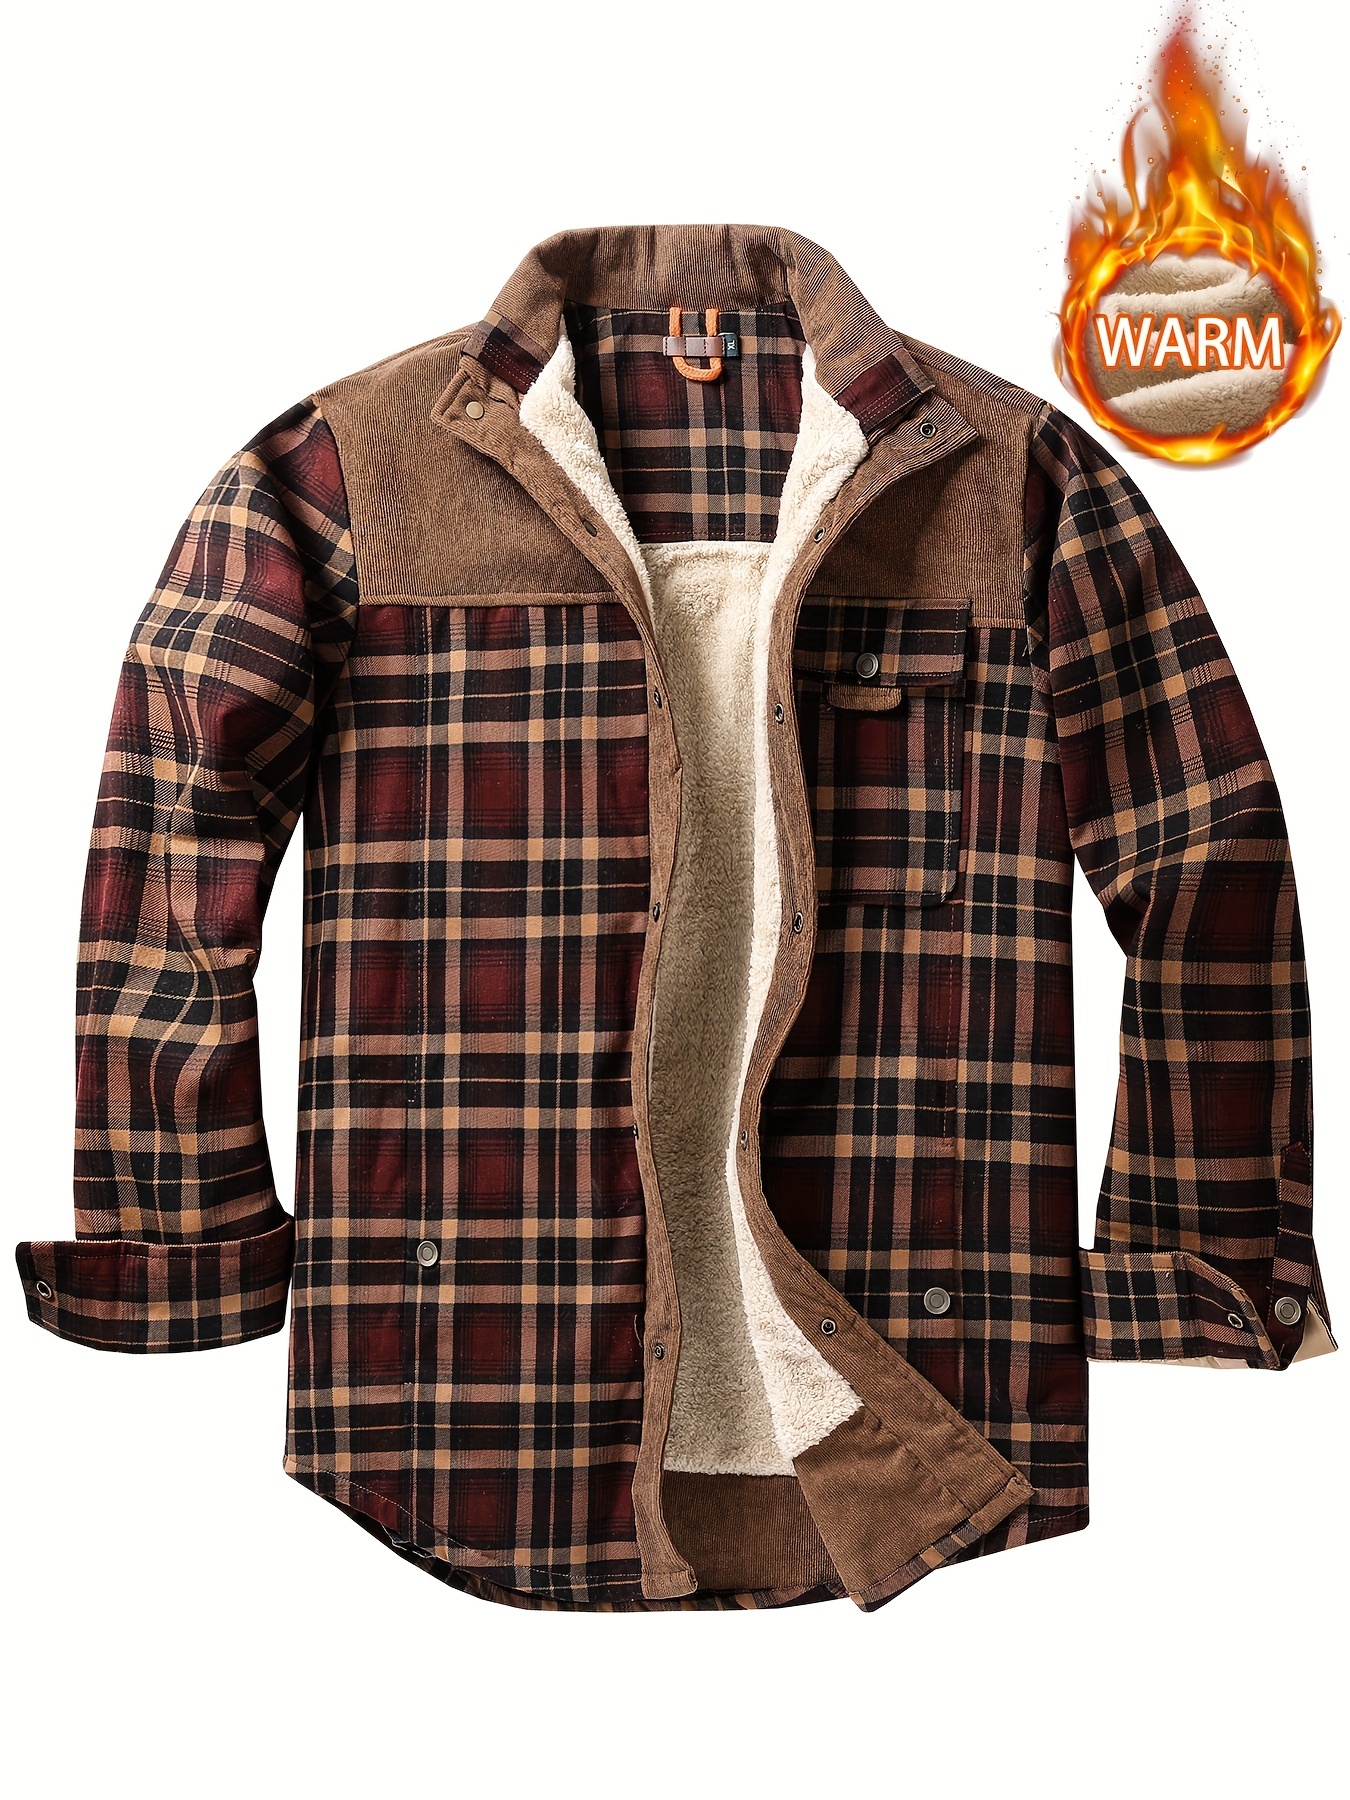 Mens Sherpa Fleece Lined Plaid Flannel Shirts Jackets Casual Thermal Button  Up Jackets Winter Warm Work Coat Plush Outwear